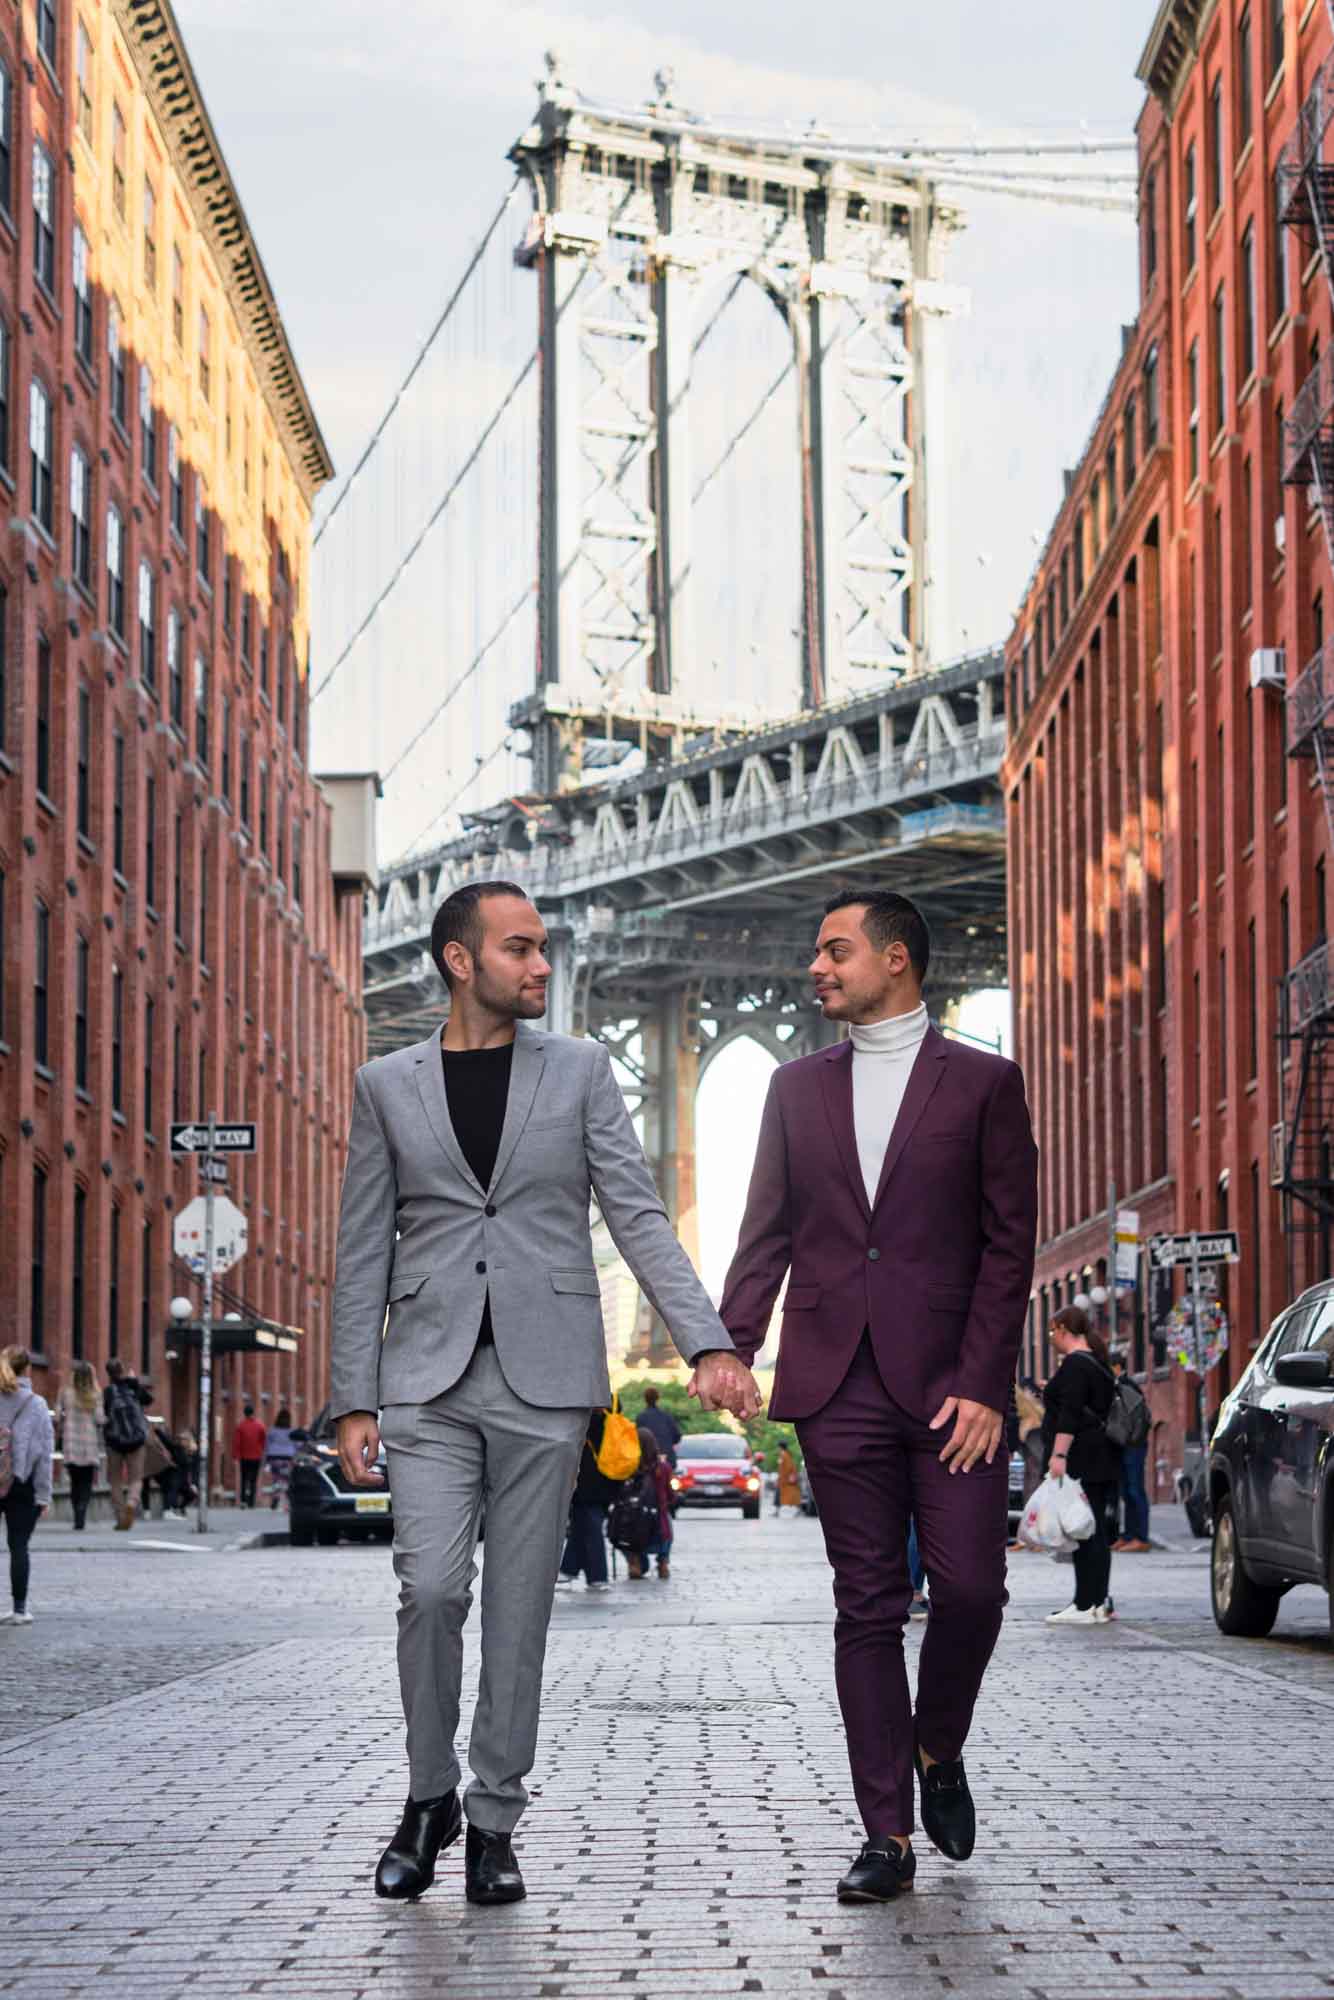 Brooklyn engagement session honoring family roots | Andreas and Nico | Featured on Equally Wed, the leading LGBTQ+ wedding magazine